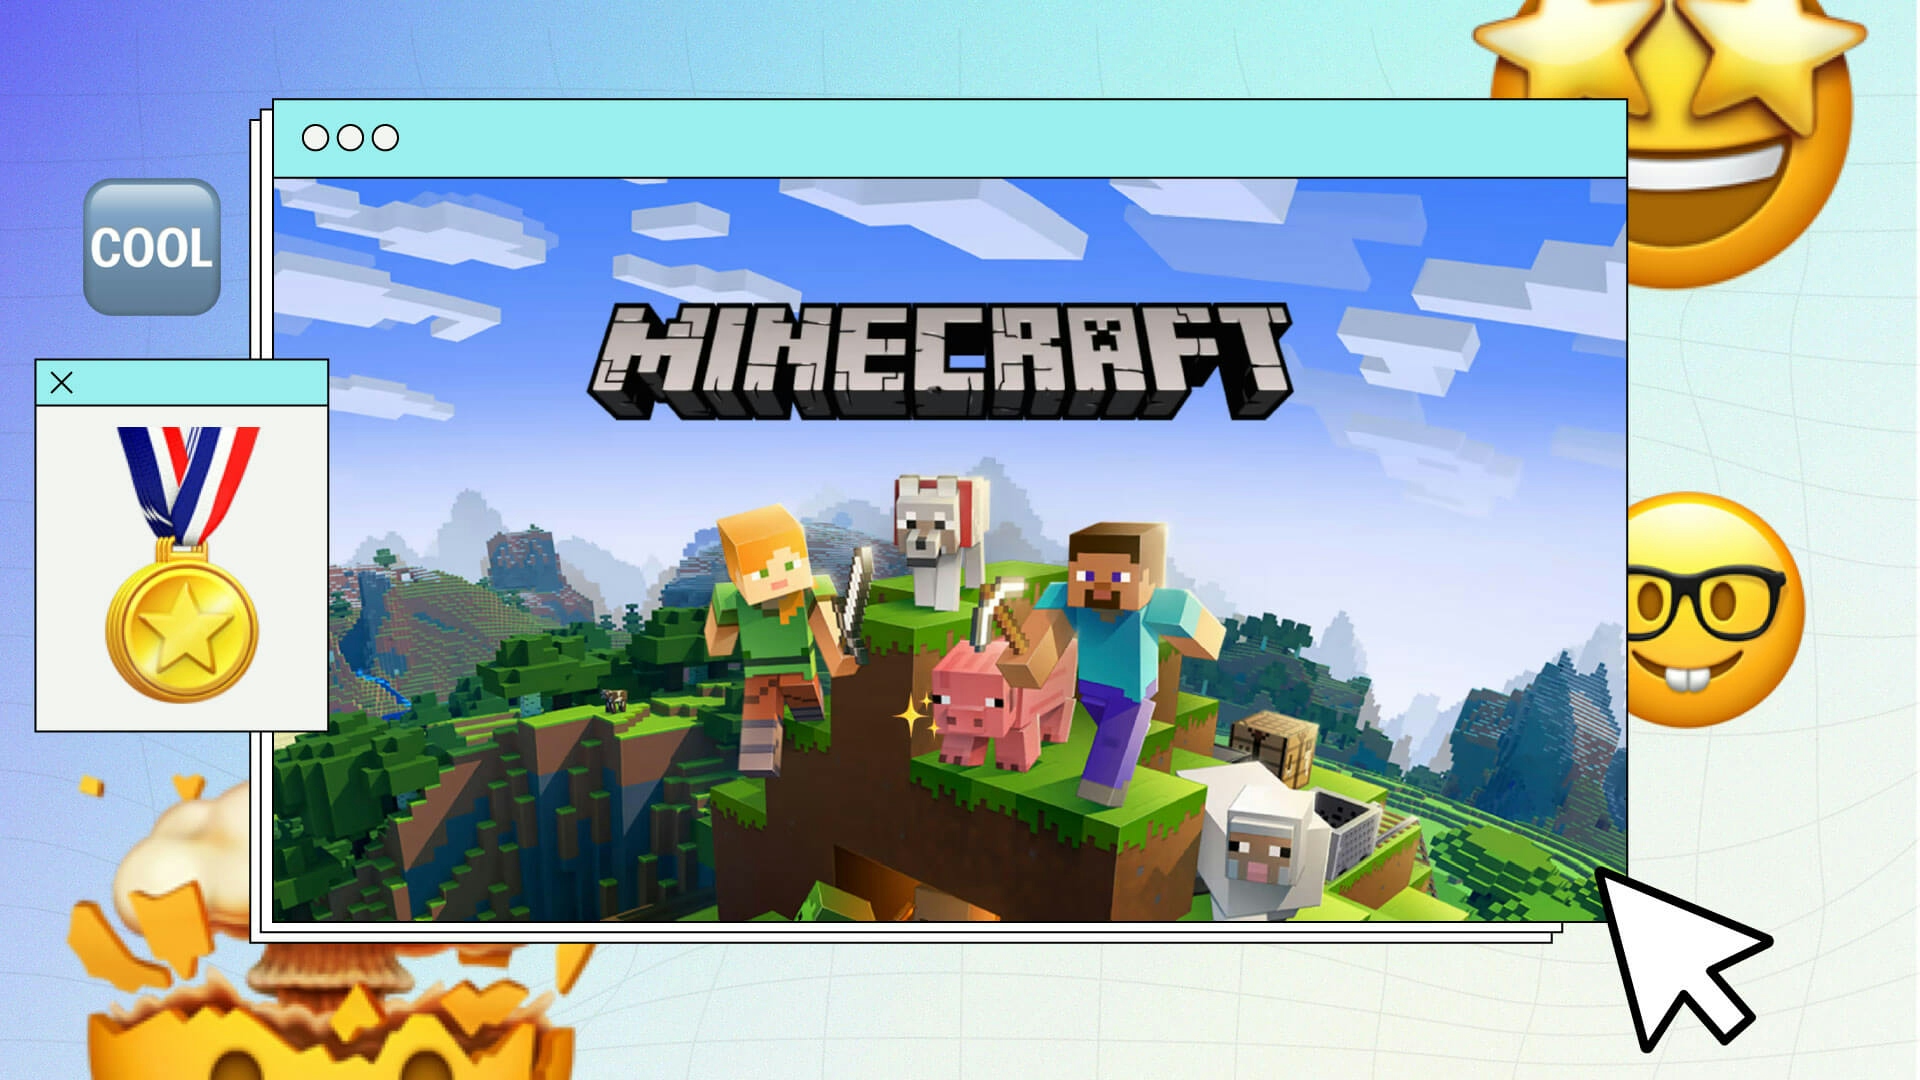 Graphic conveying Gen Z's favorite video games, including Minecraft